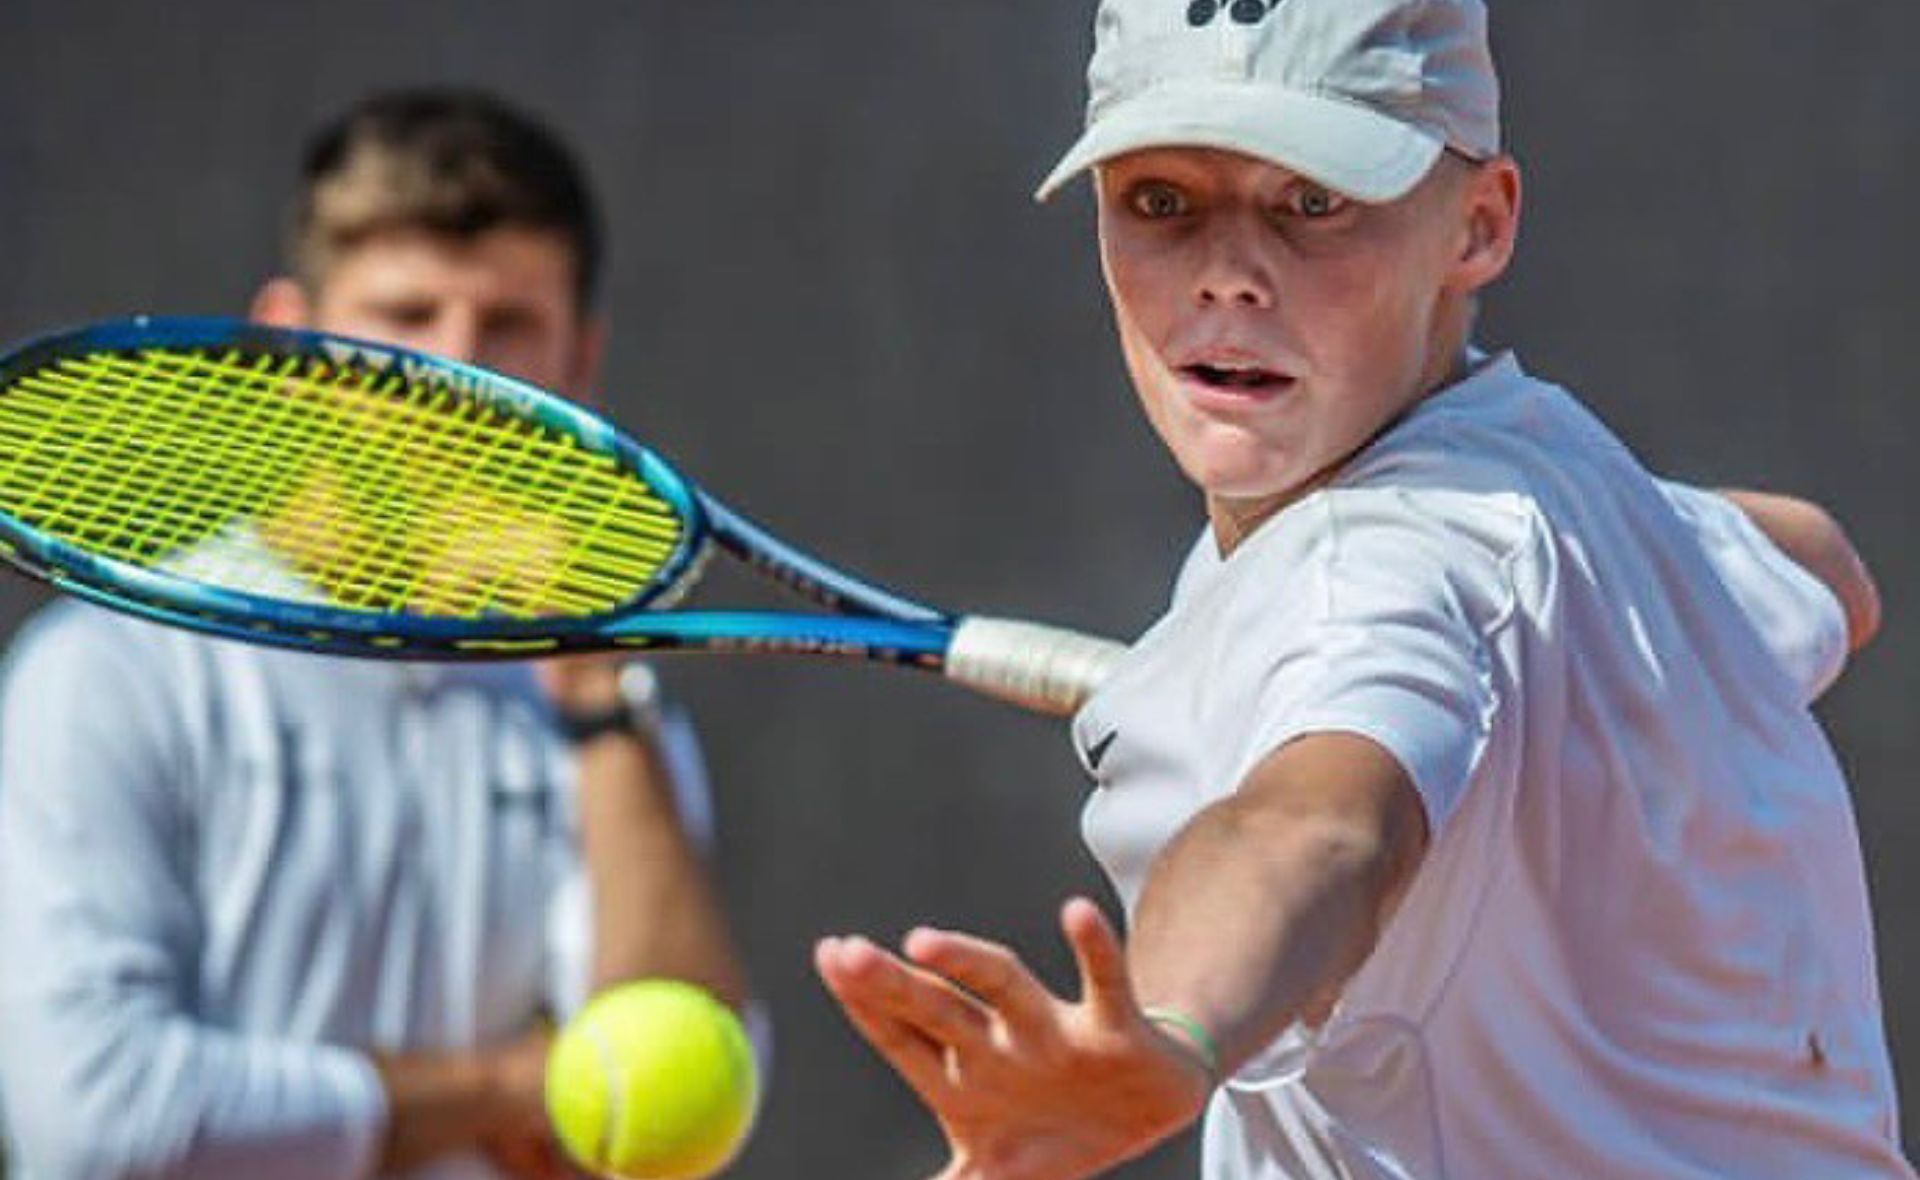 Lleyton Hewitt’s son is on his way to the Australian Open